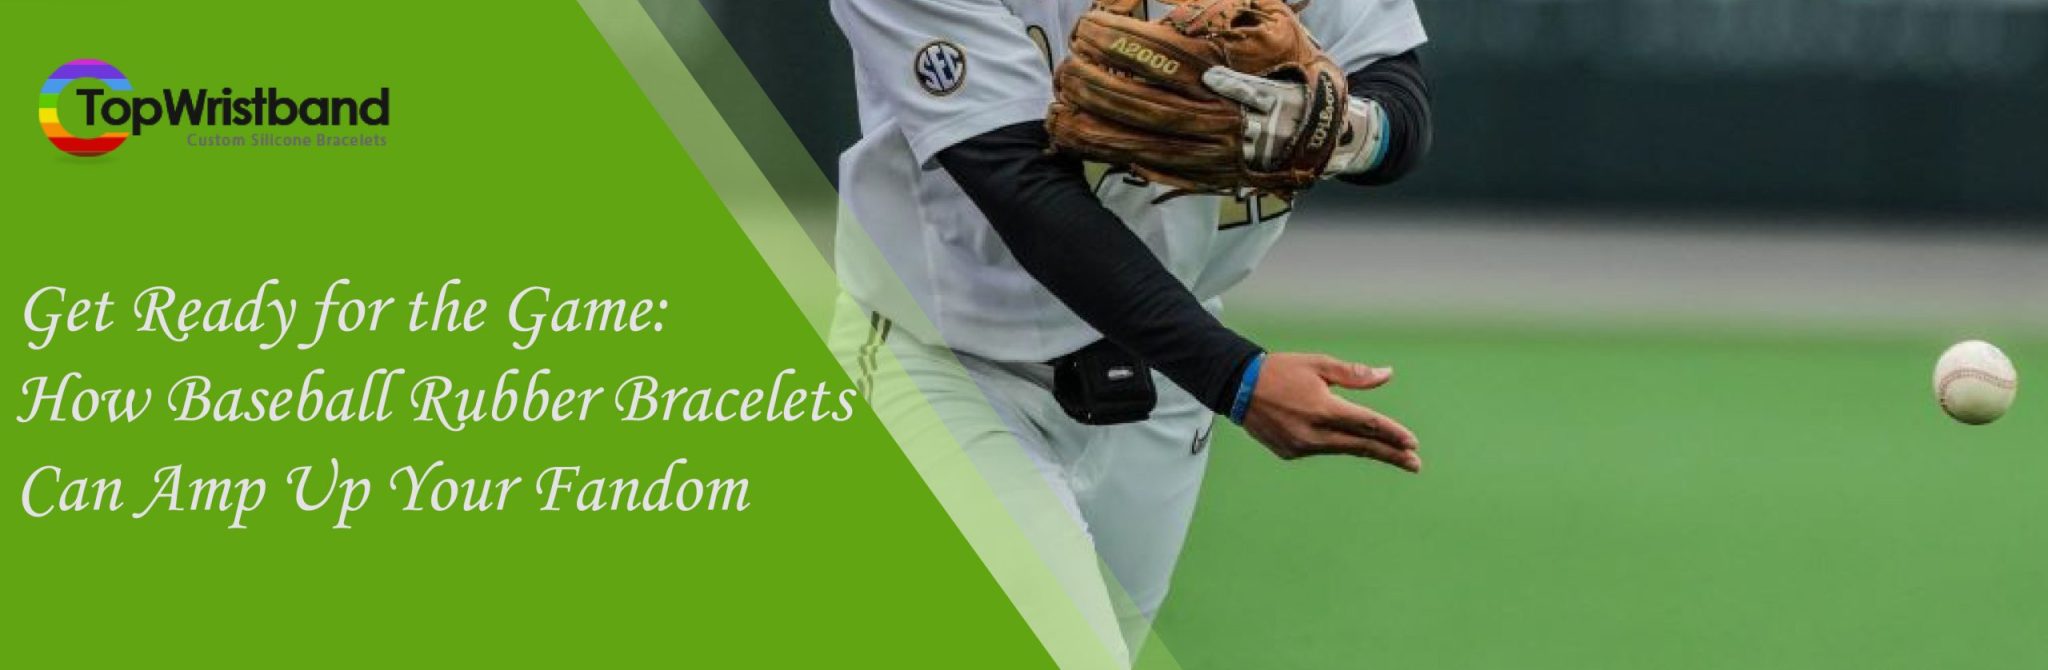 Get Ready for 1 Game: How Baseball Rubber Bracelets Can Amp Up Your Fandom